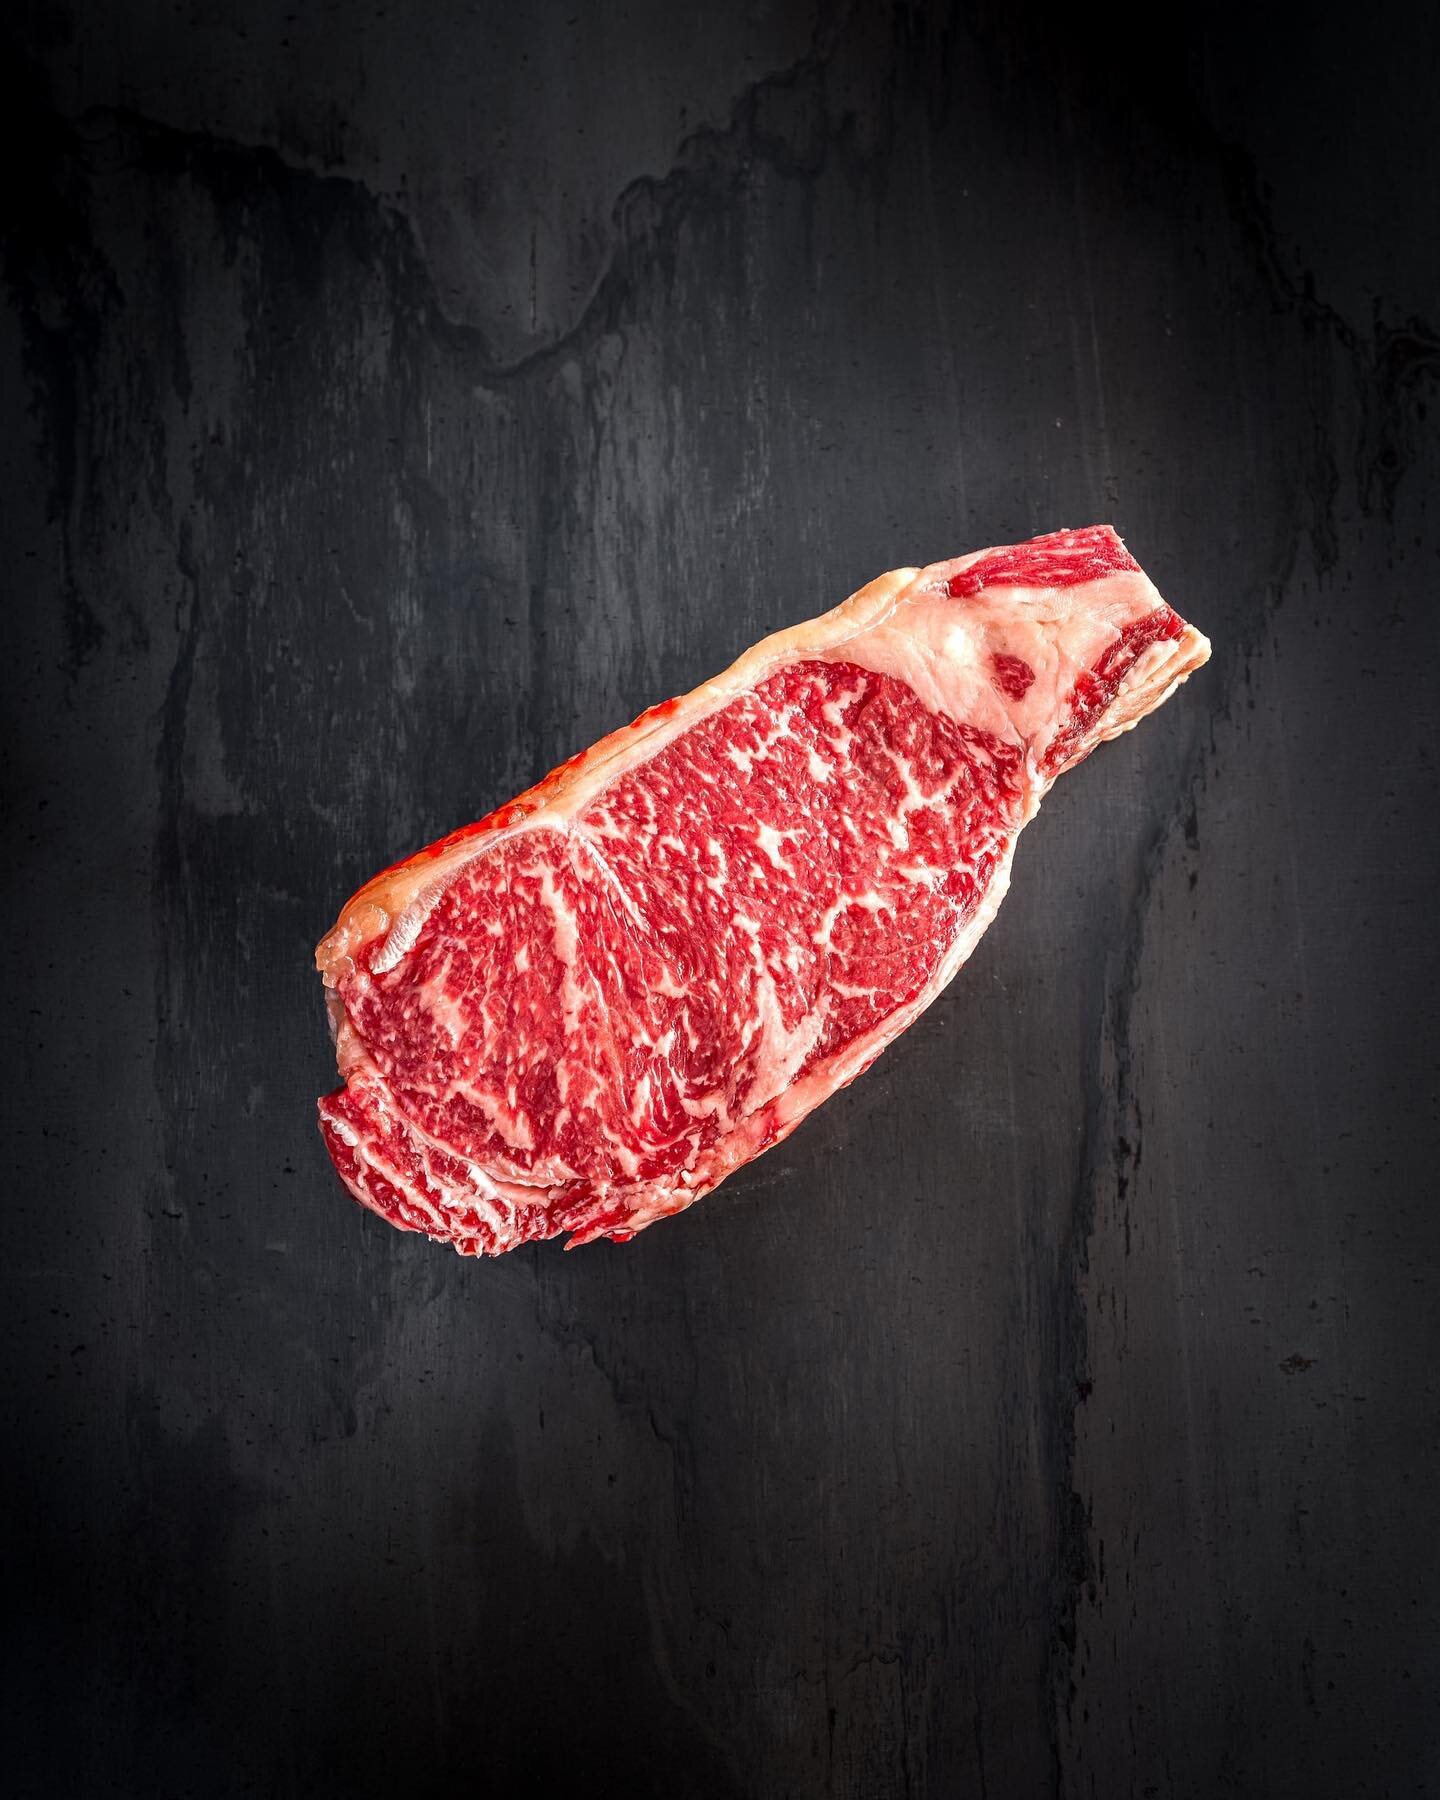 Our meat | The raw material is what makes the difference, that's why we select the best cuts of premium meat imported from all over the world. 🥩